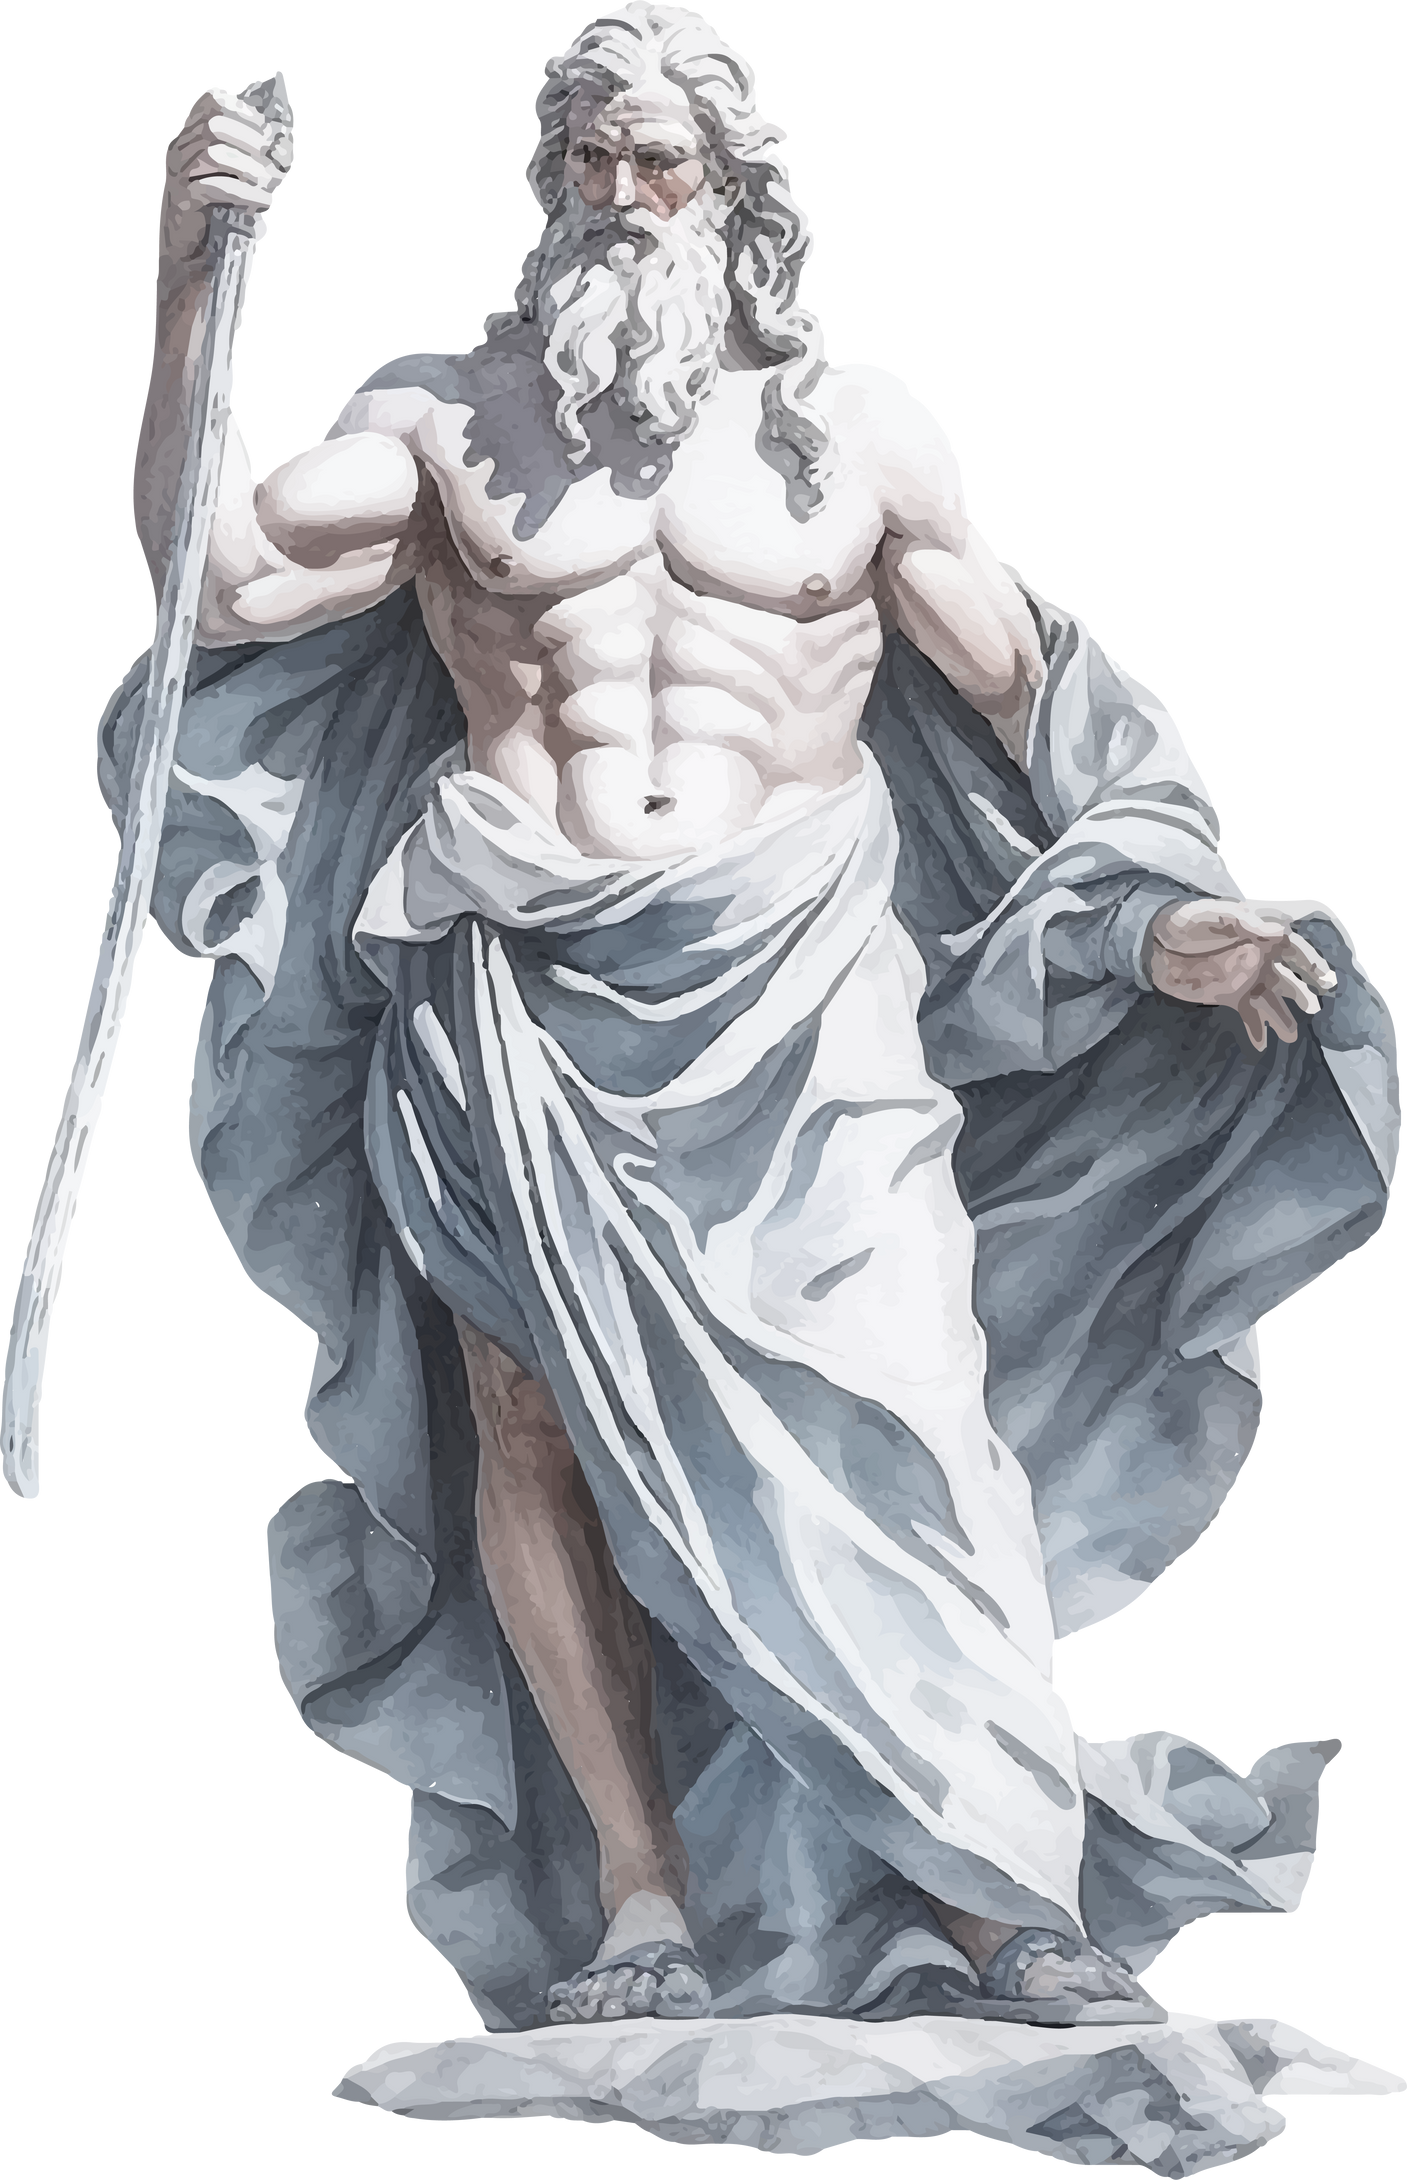 god statue in watercolor style illustration